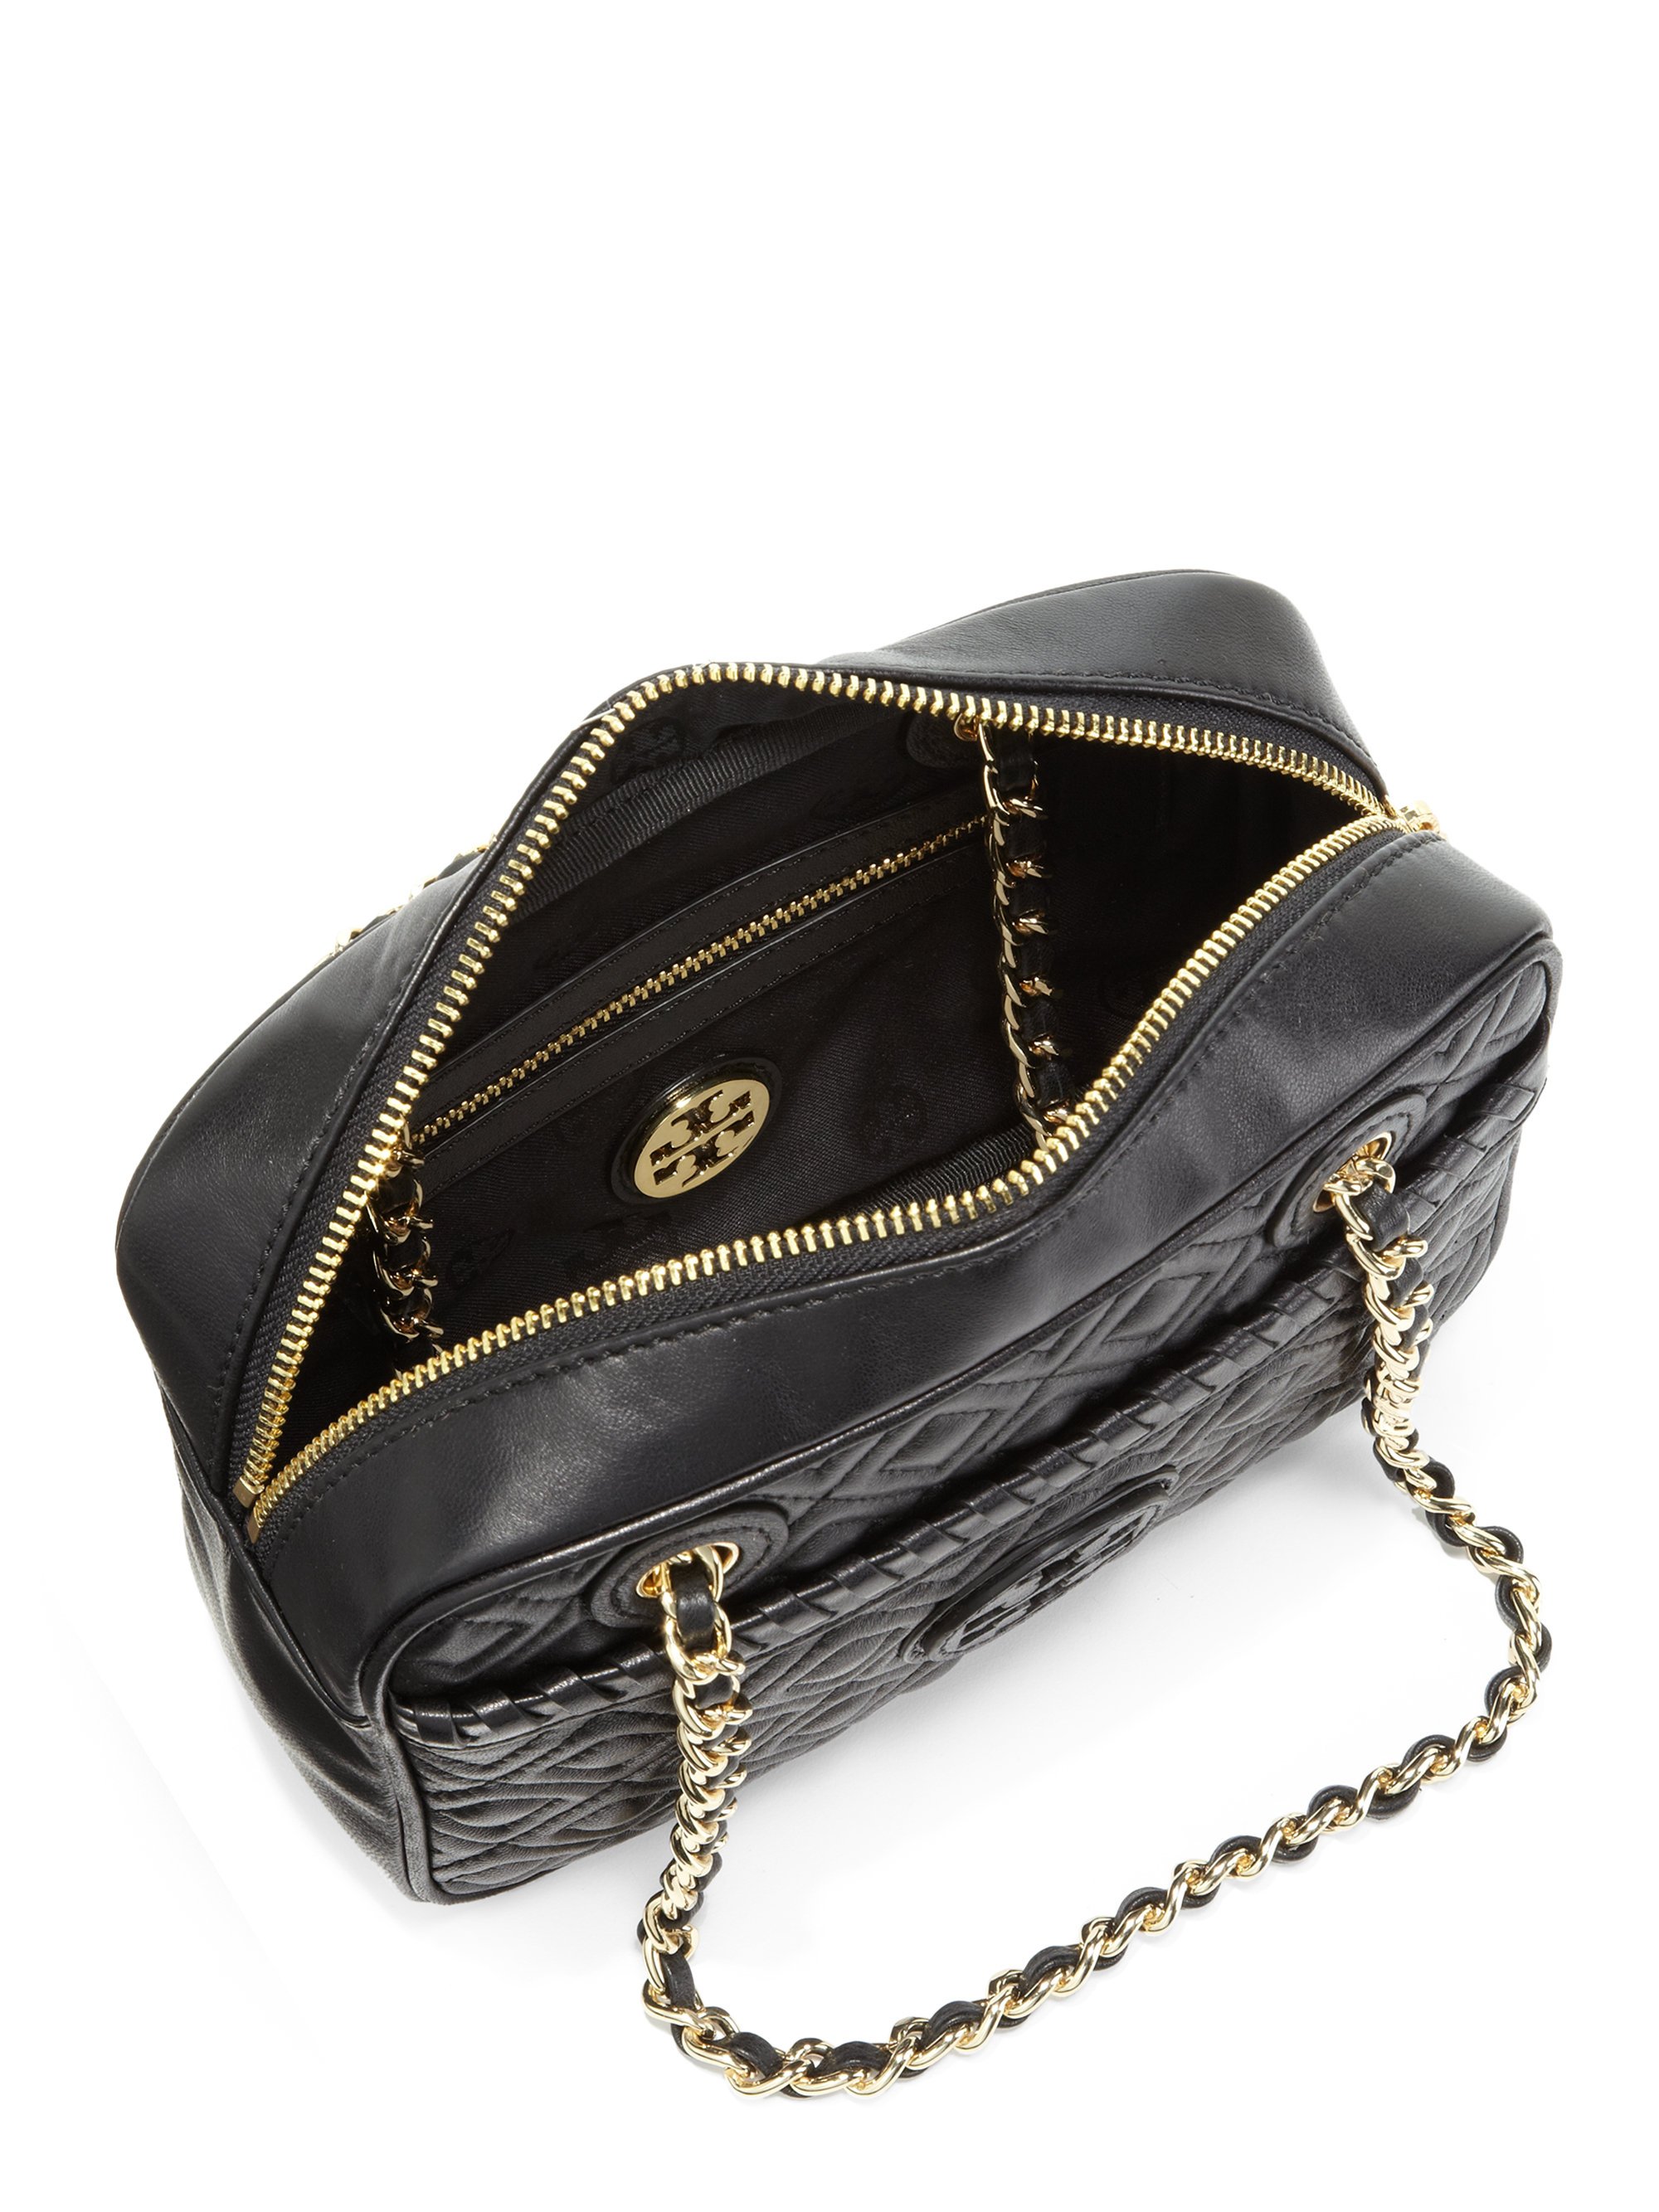 Tory Burch Marion Quilted Crossbody Bag in Black - Lyst